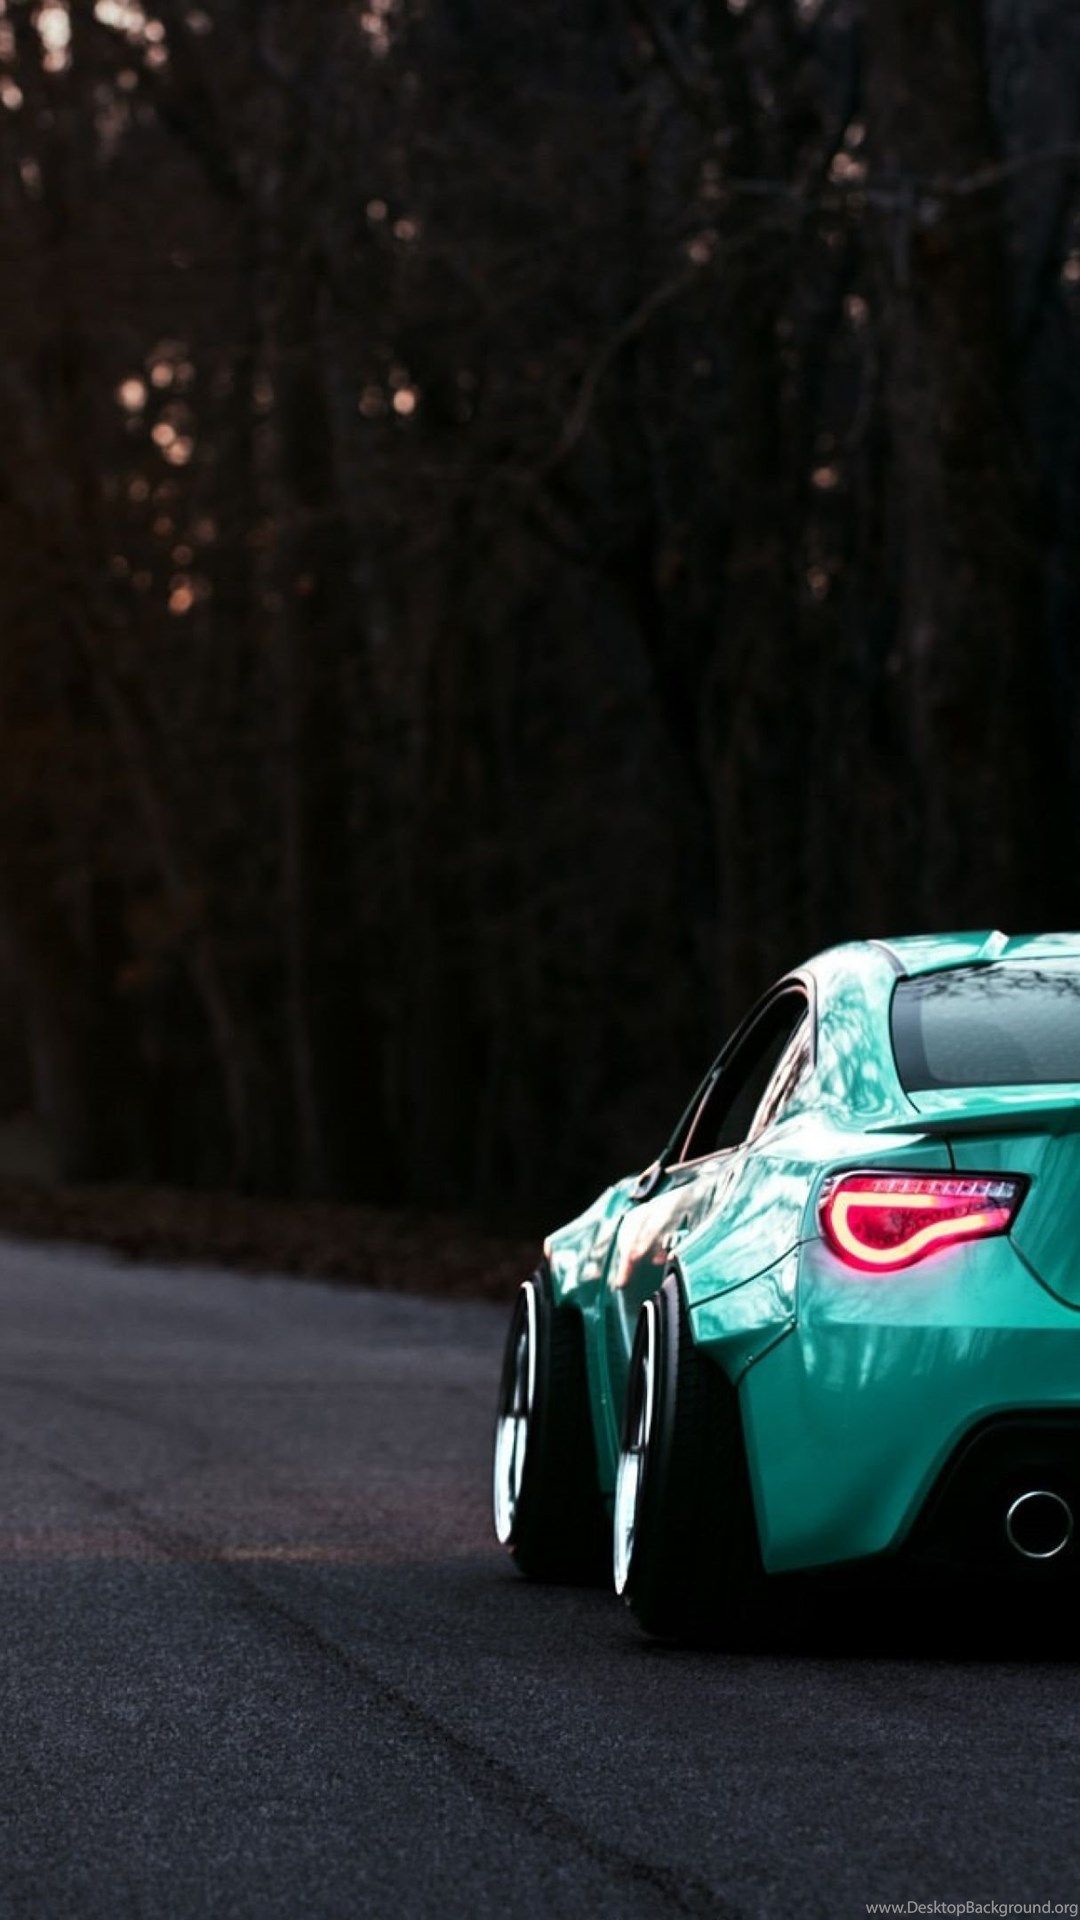 Toyota 86 Android Wallpapers Wallpaper Cave